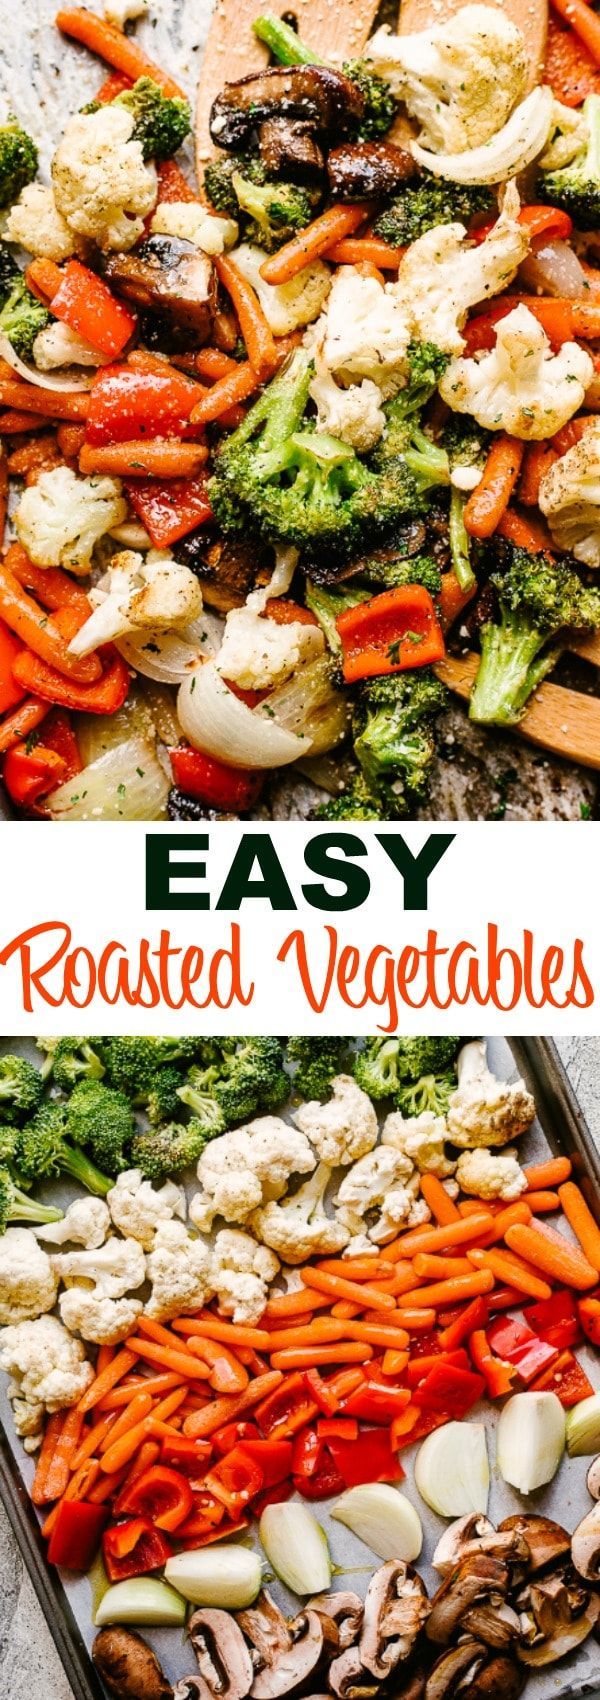 Easy Oven Roasted Vegetables Recipe | Diethood -   17 healthy recipes Salad ovens ideas